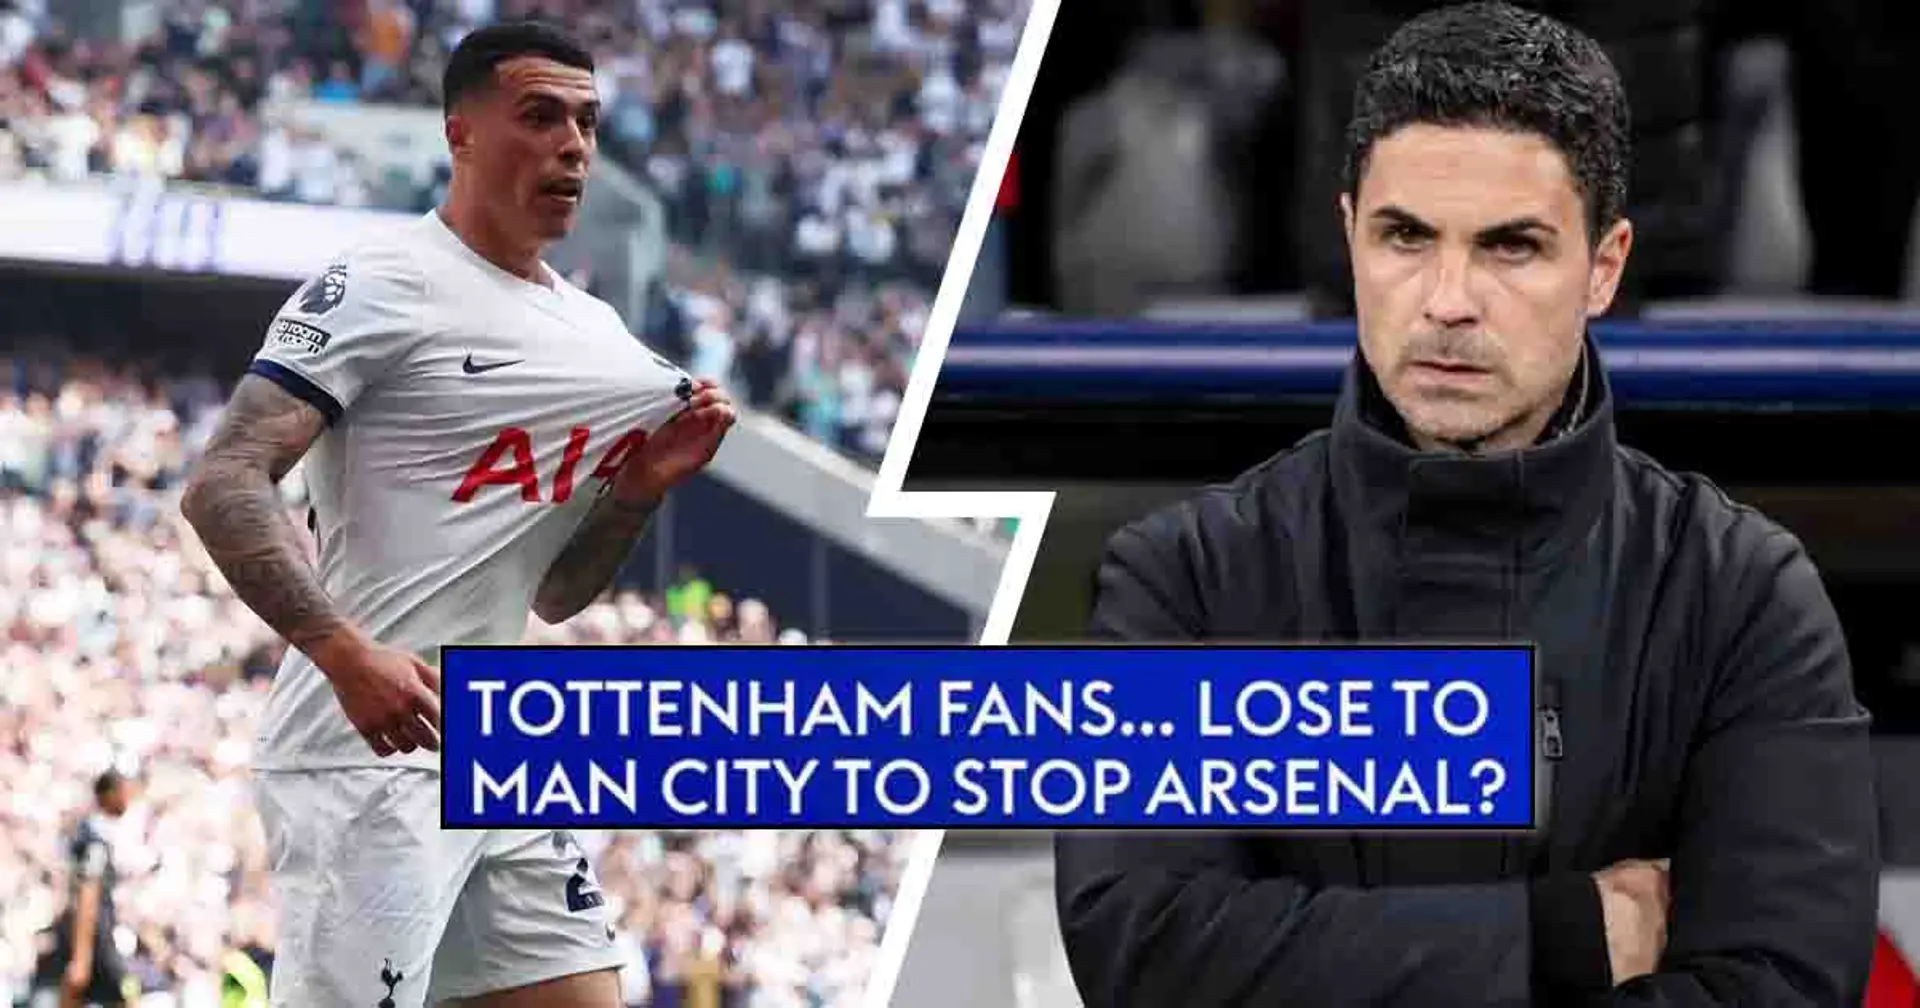 Do Tottenham fans want to intentionally lose Man City clash and deny Arsenal PL title? Answered